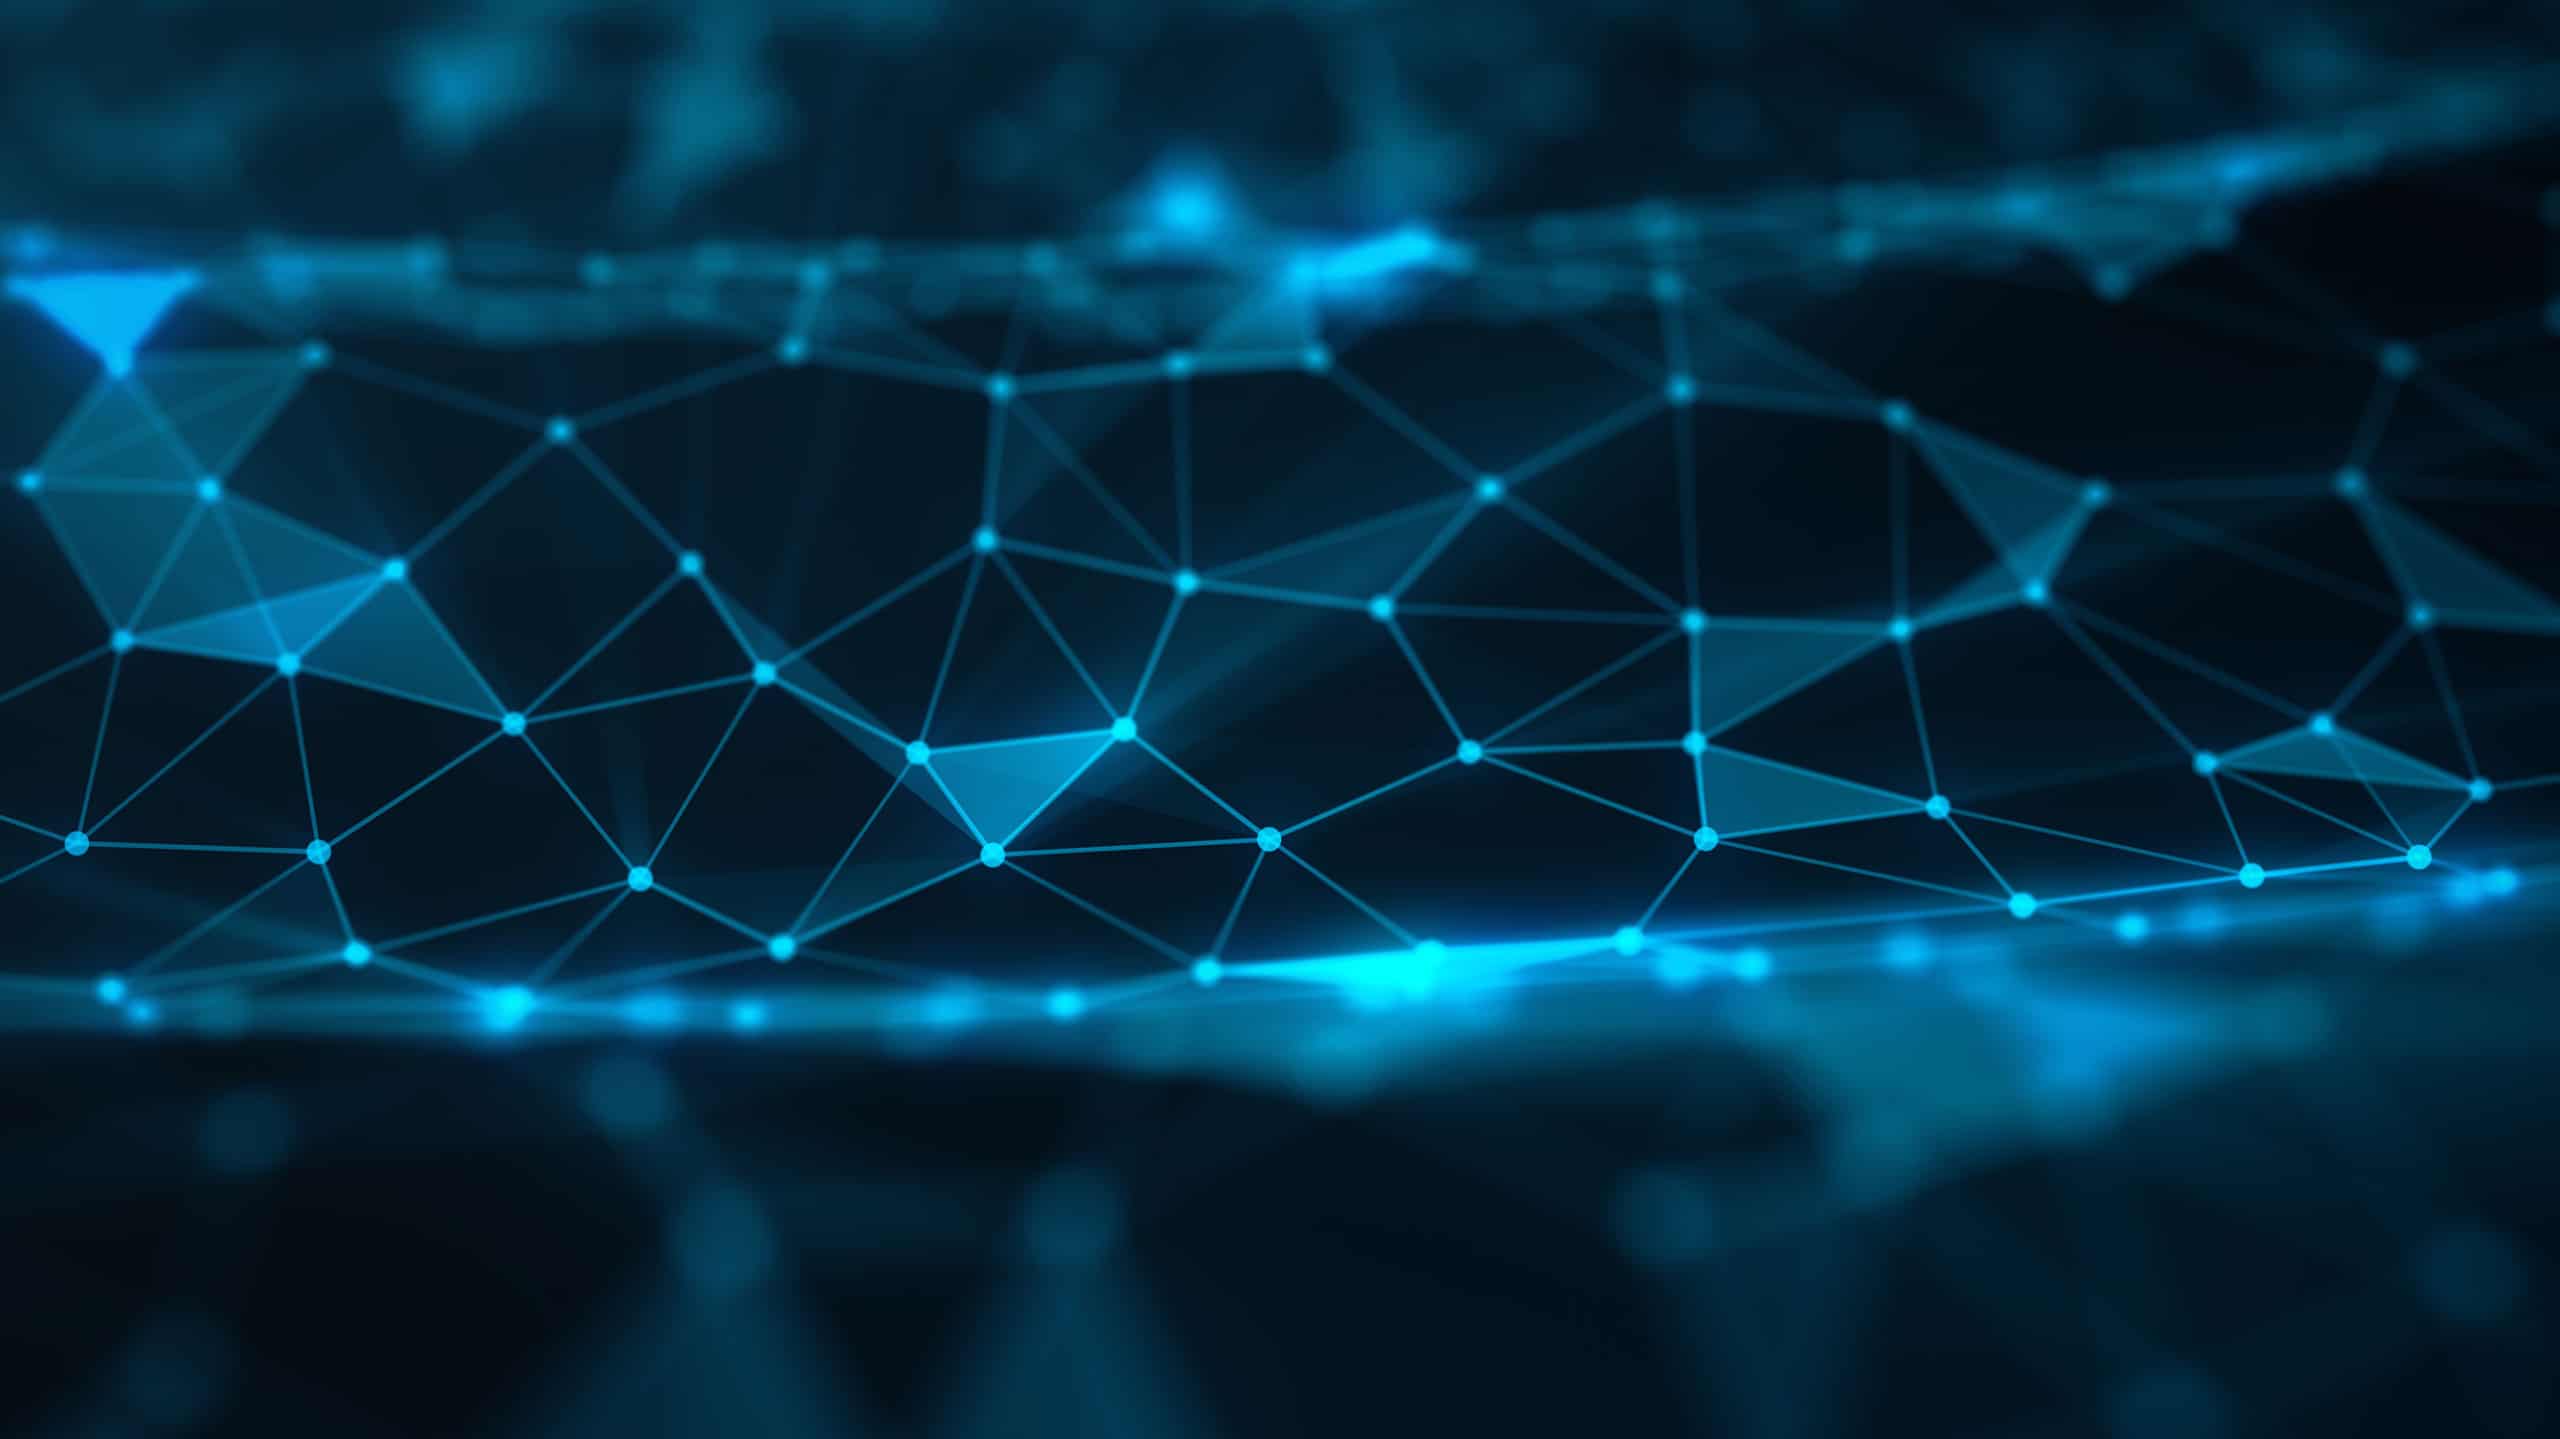 Abstract digital background displaying interconnected blue and teal nodes with glowing DNS connections forming a mesh-like structure across a dark backdrop.